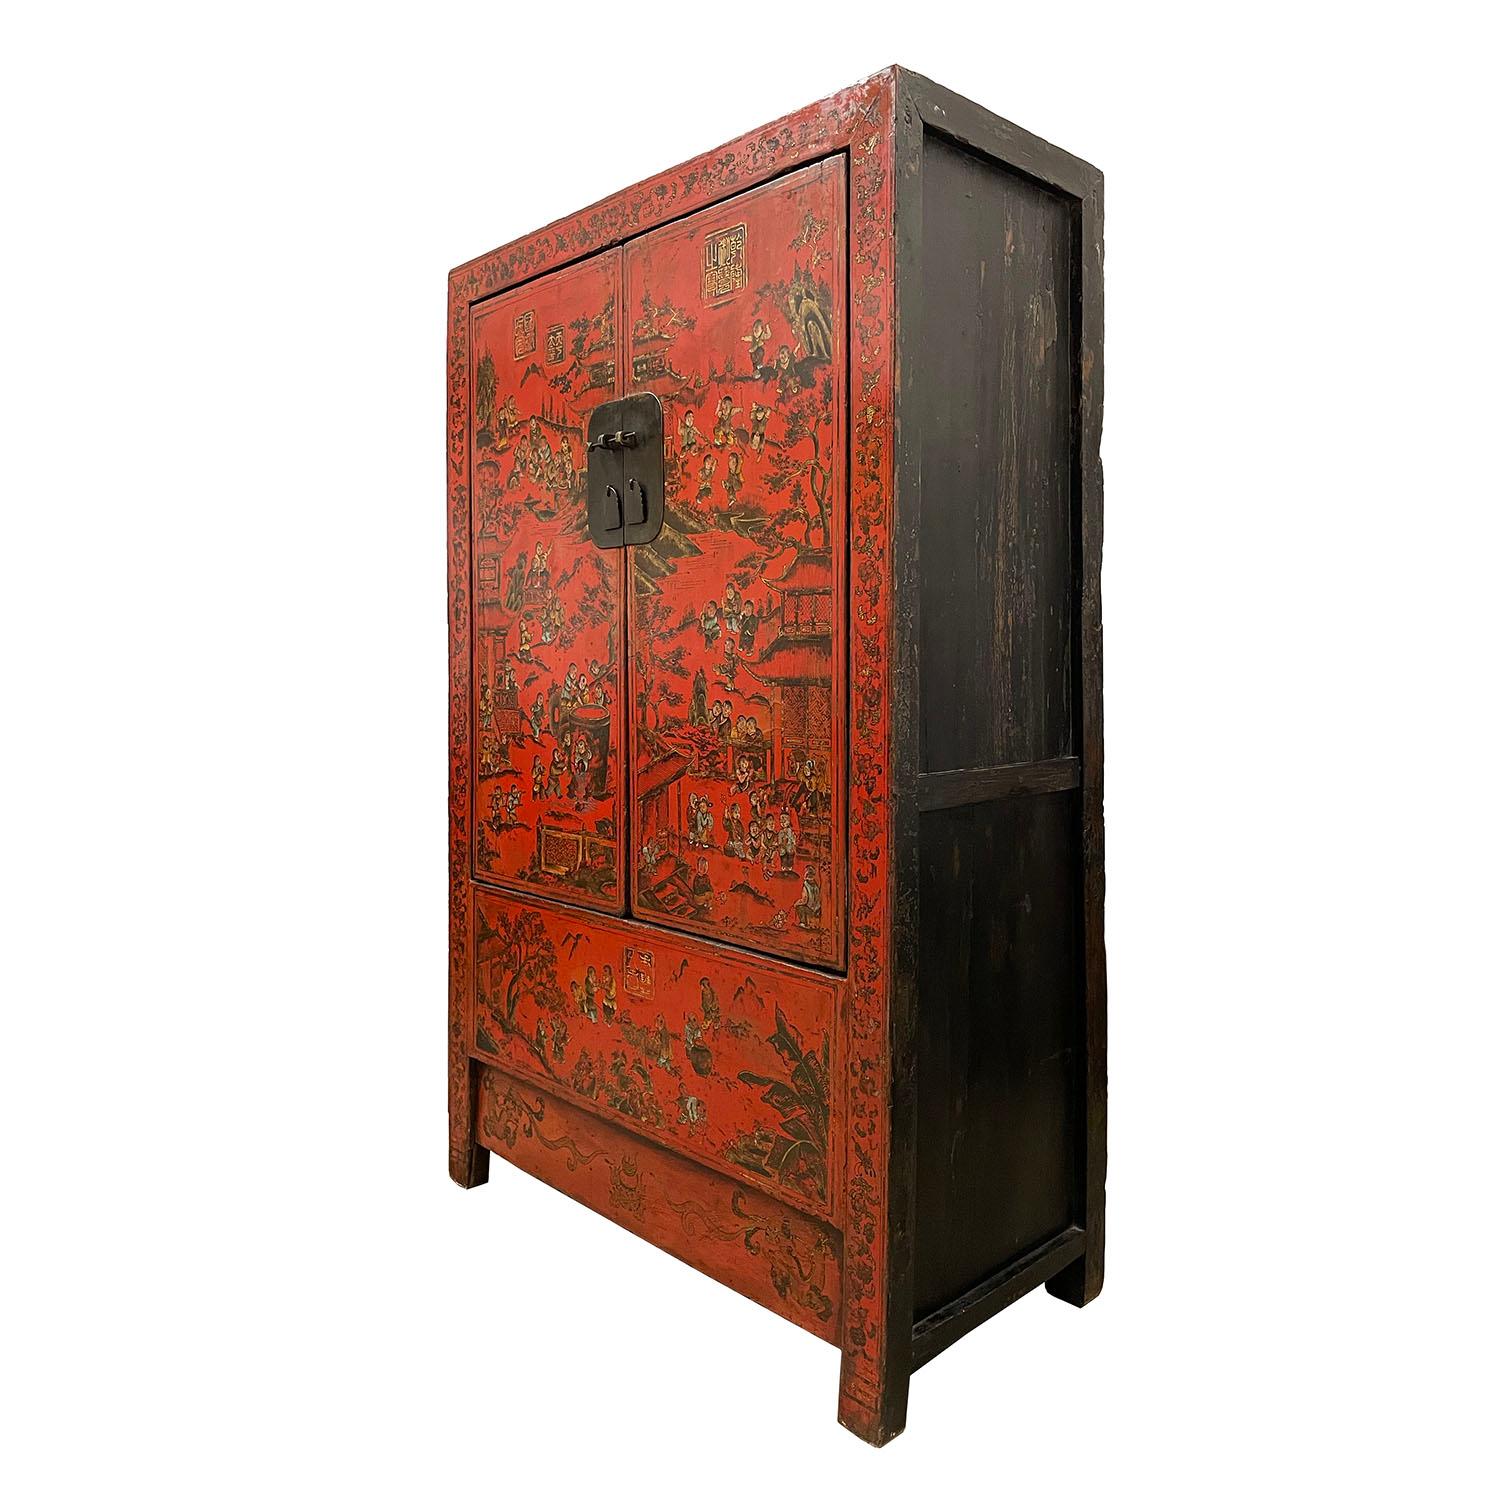  Very well constructed with two open doors and shelf, inside cabinet, wedding armoire with red lacquer 100's kids painting on the front and have coordinated antiqued hardware. This beautiful Chinese traditional red wedding Armoire features two